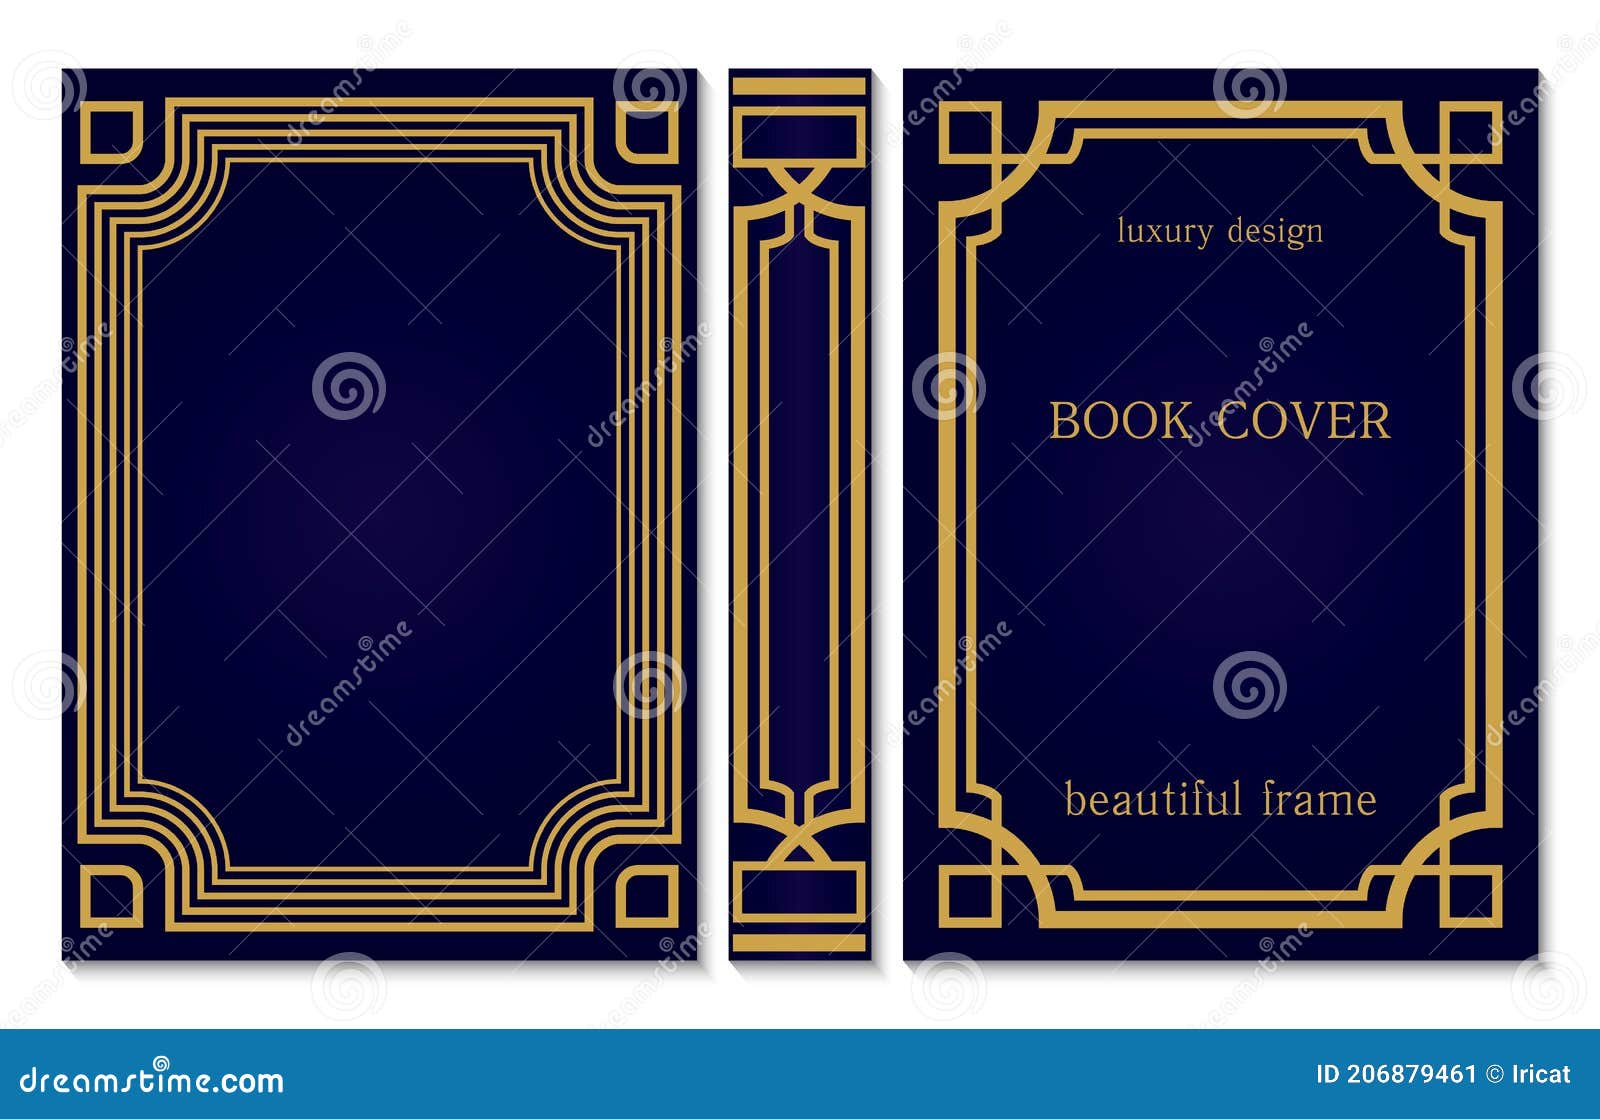 border of book cover